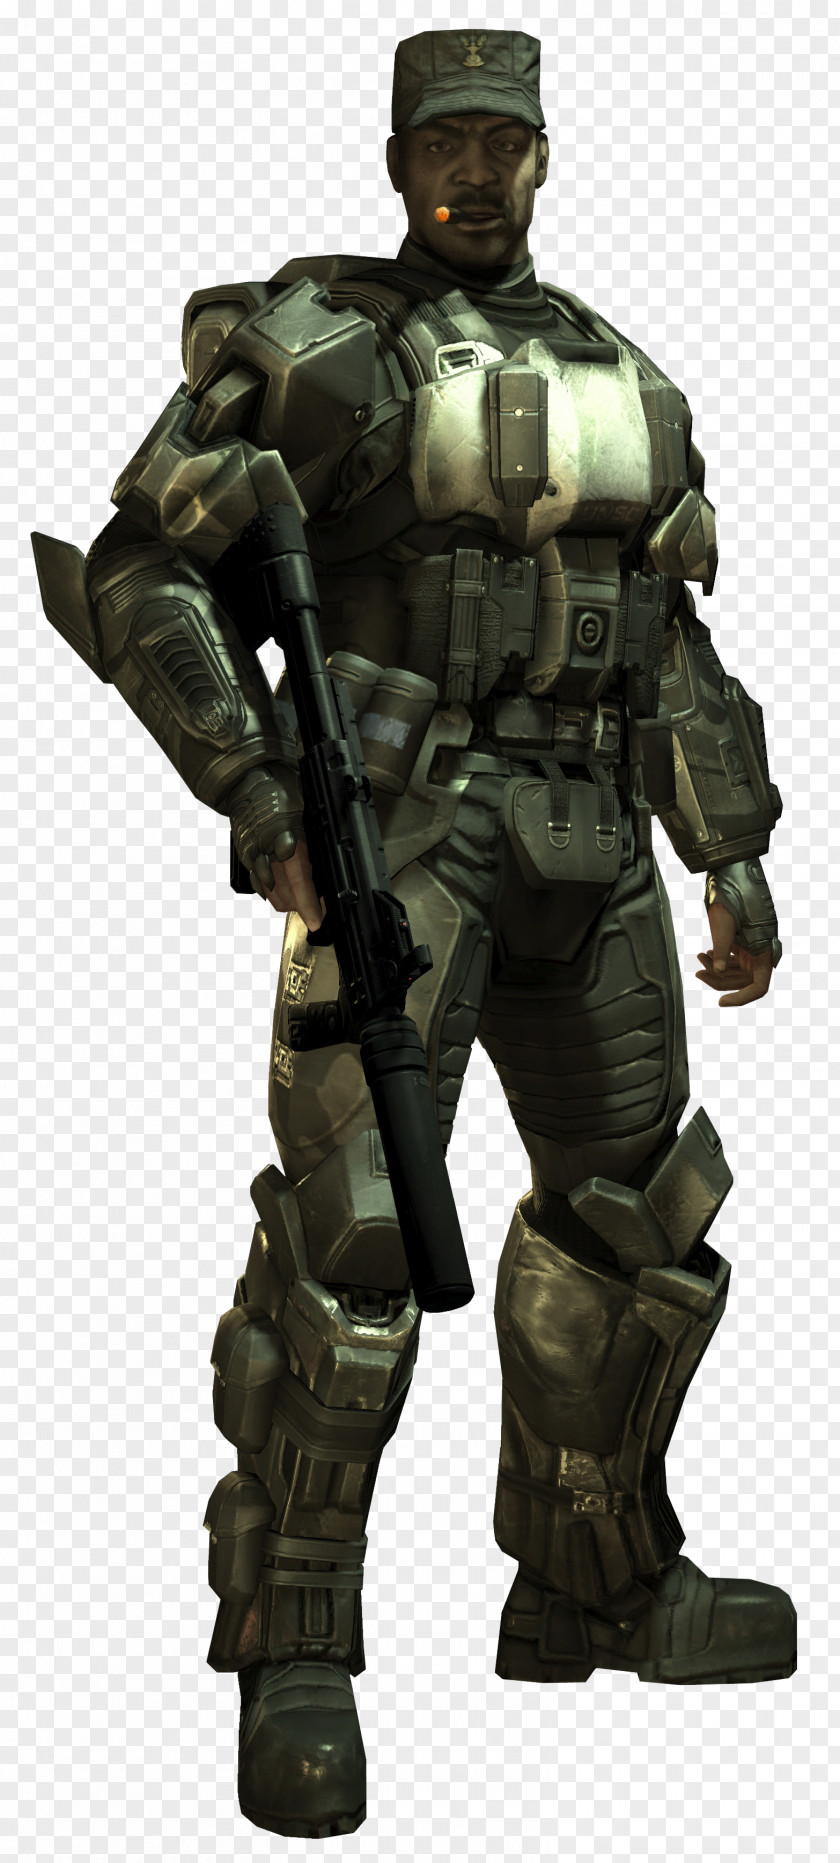 Halo 3: ODST Halo: Reach Xbox 360 2 PNG